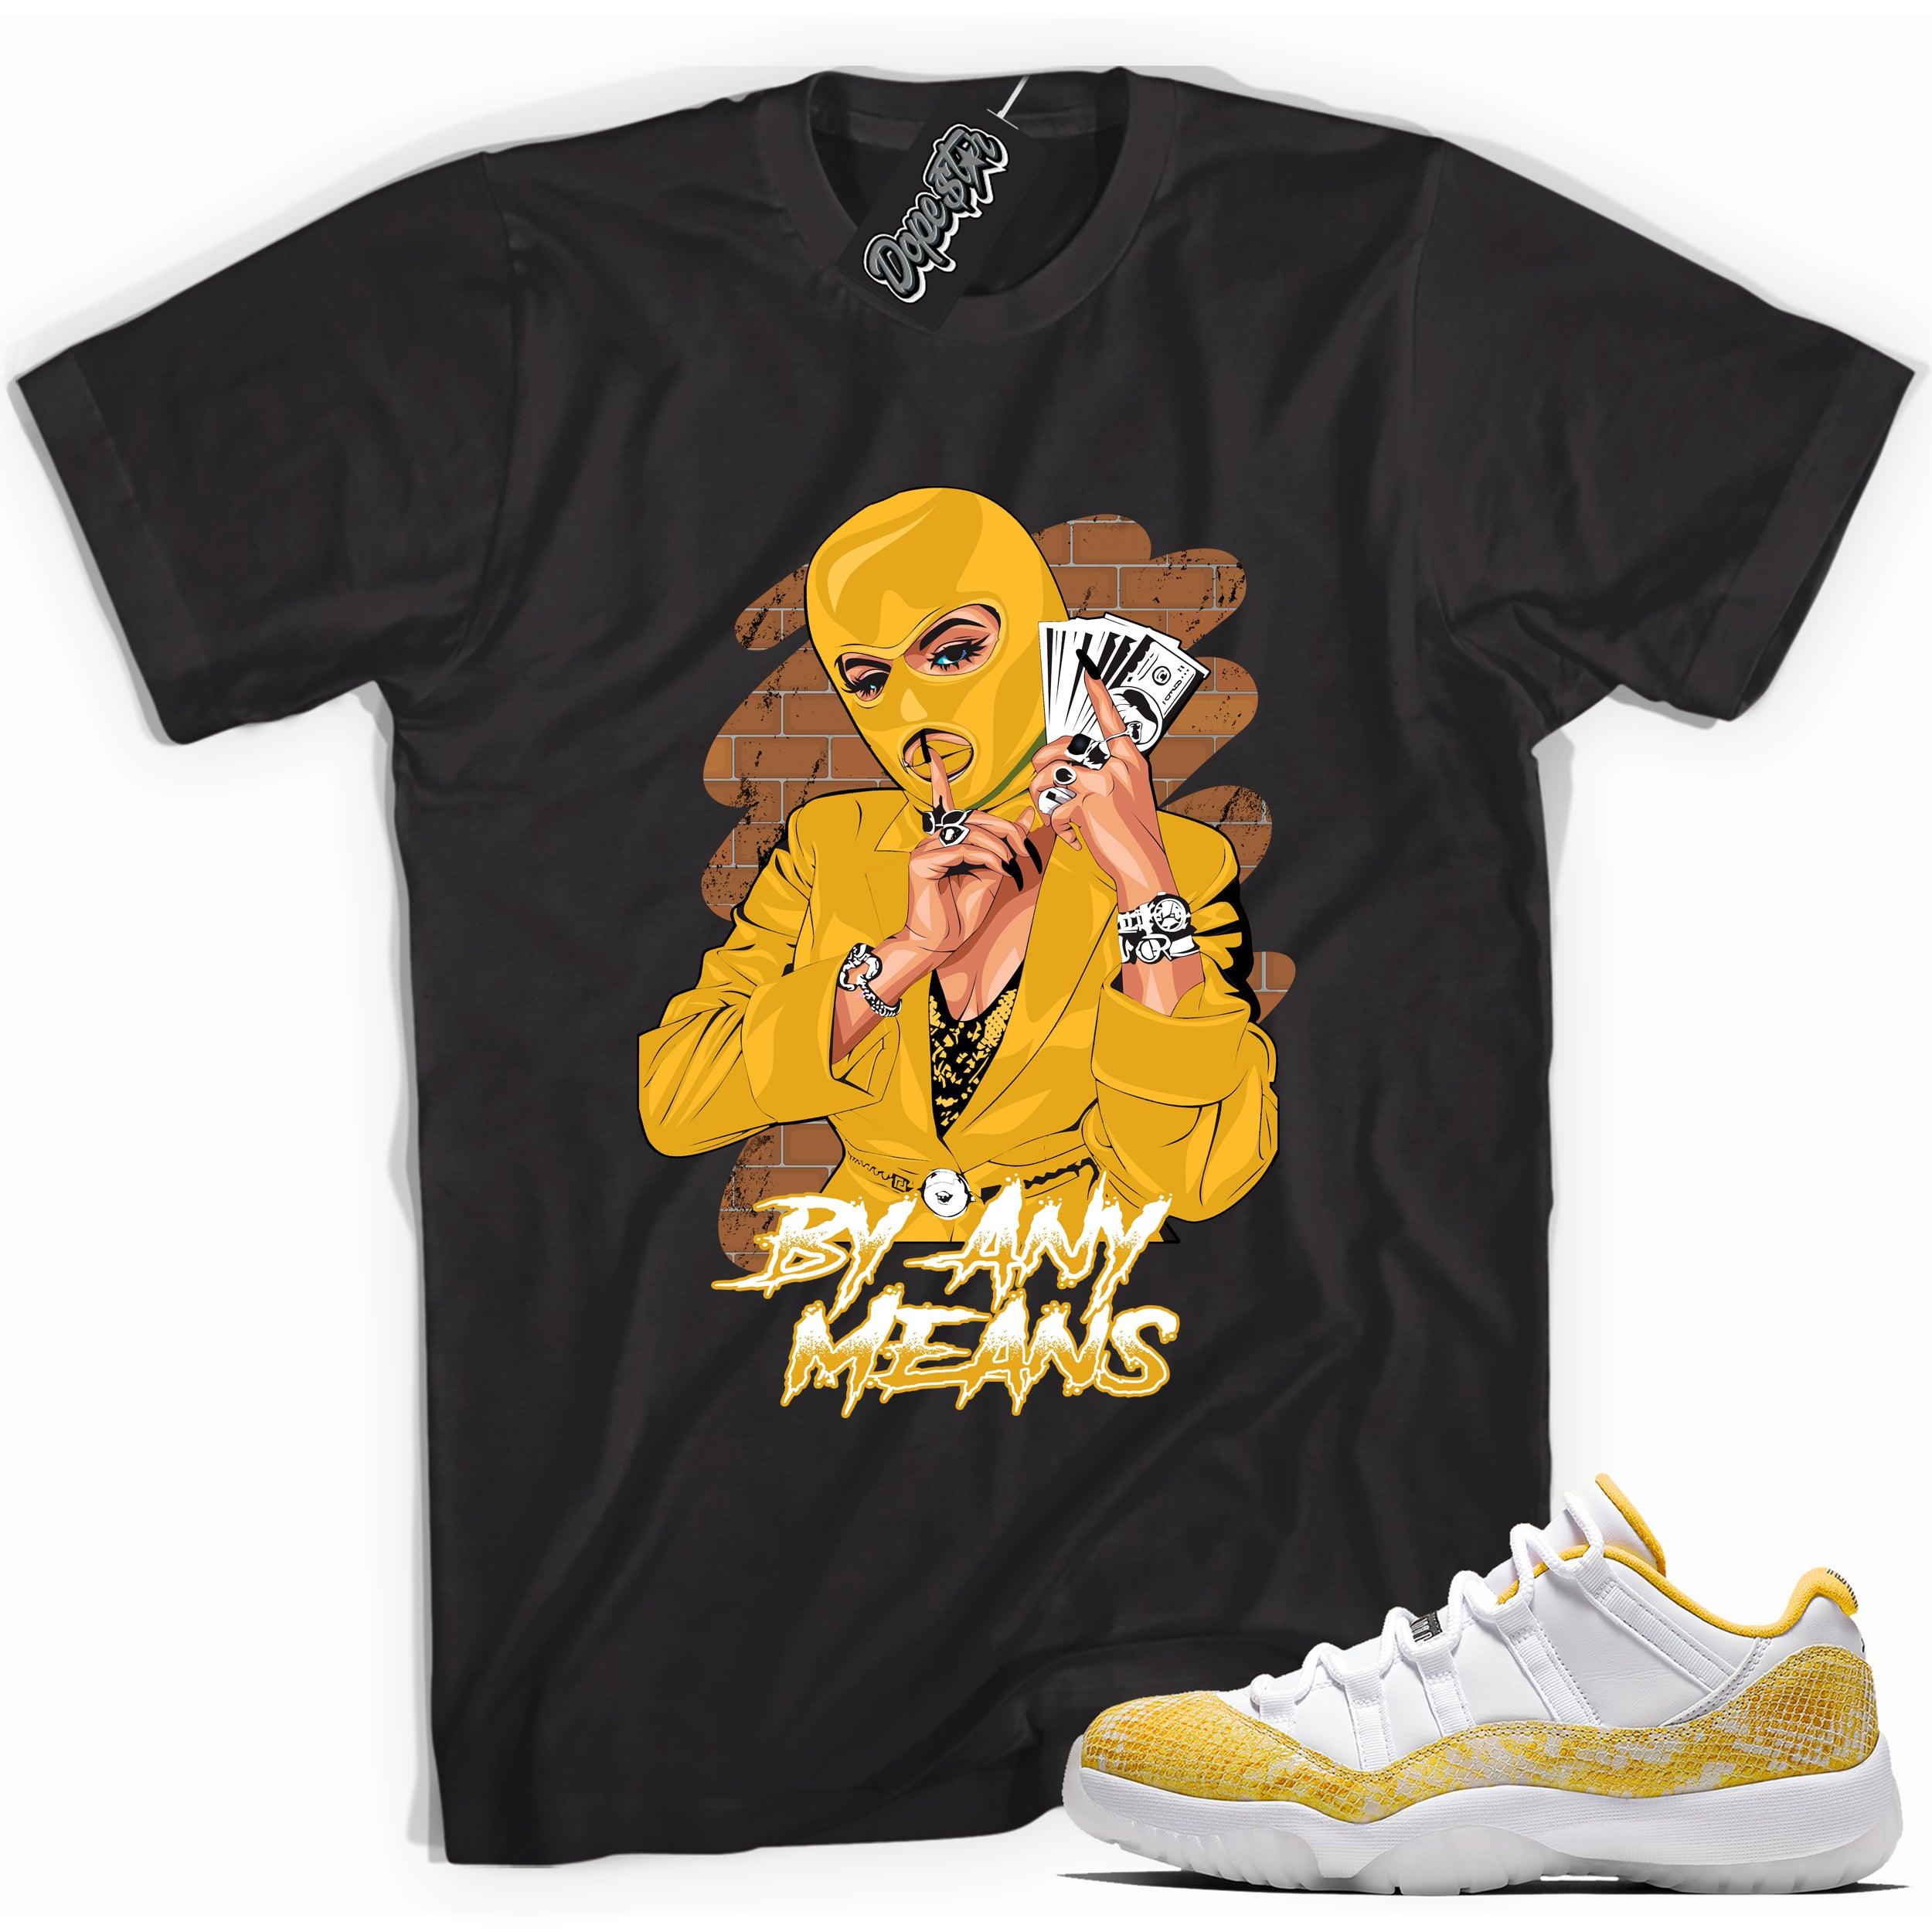 Cool black graphic tee with 'by any means' print, that perfectly matches  Air Jordan 11 Low Yellow Snakeskin sneakers